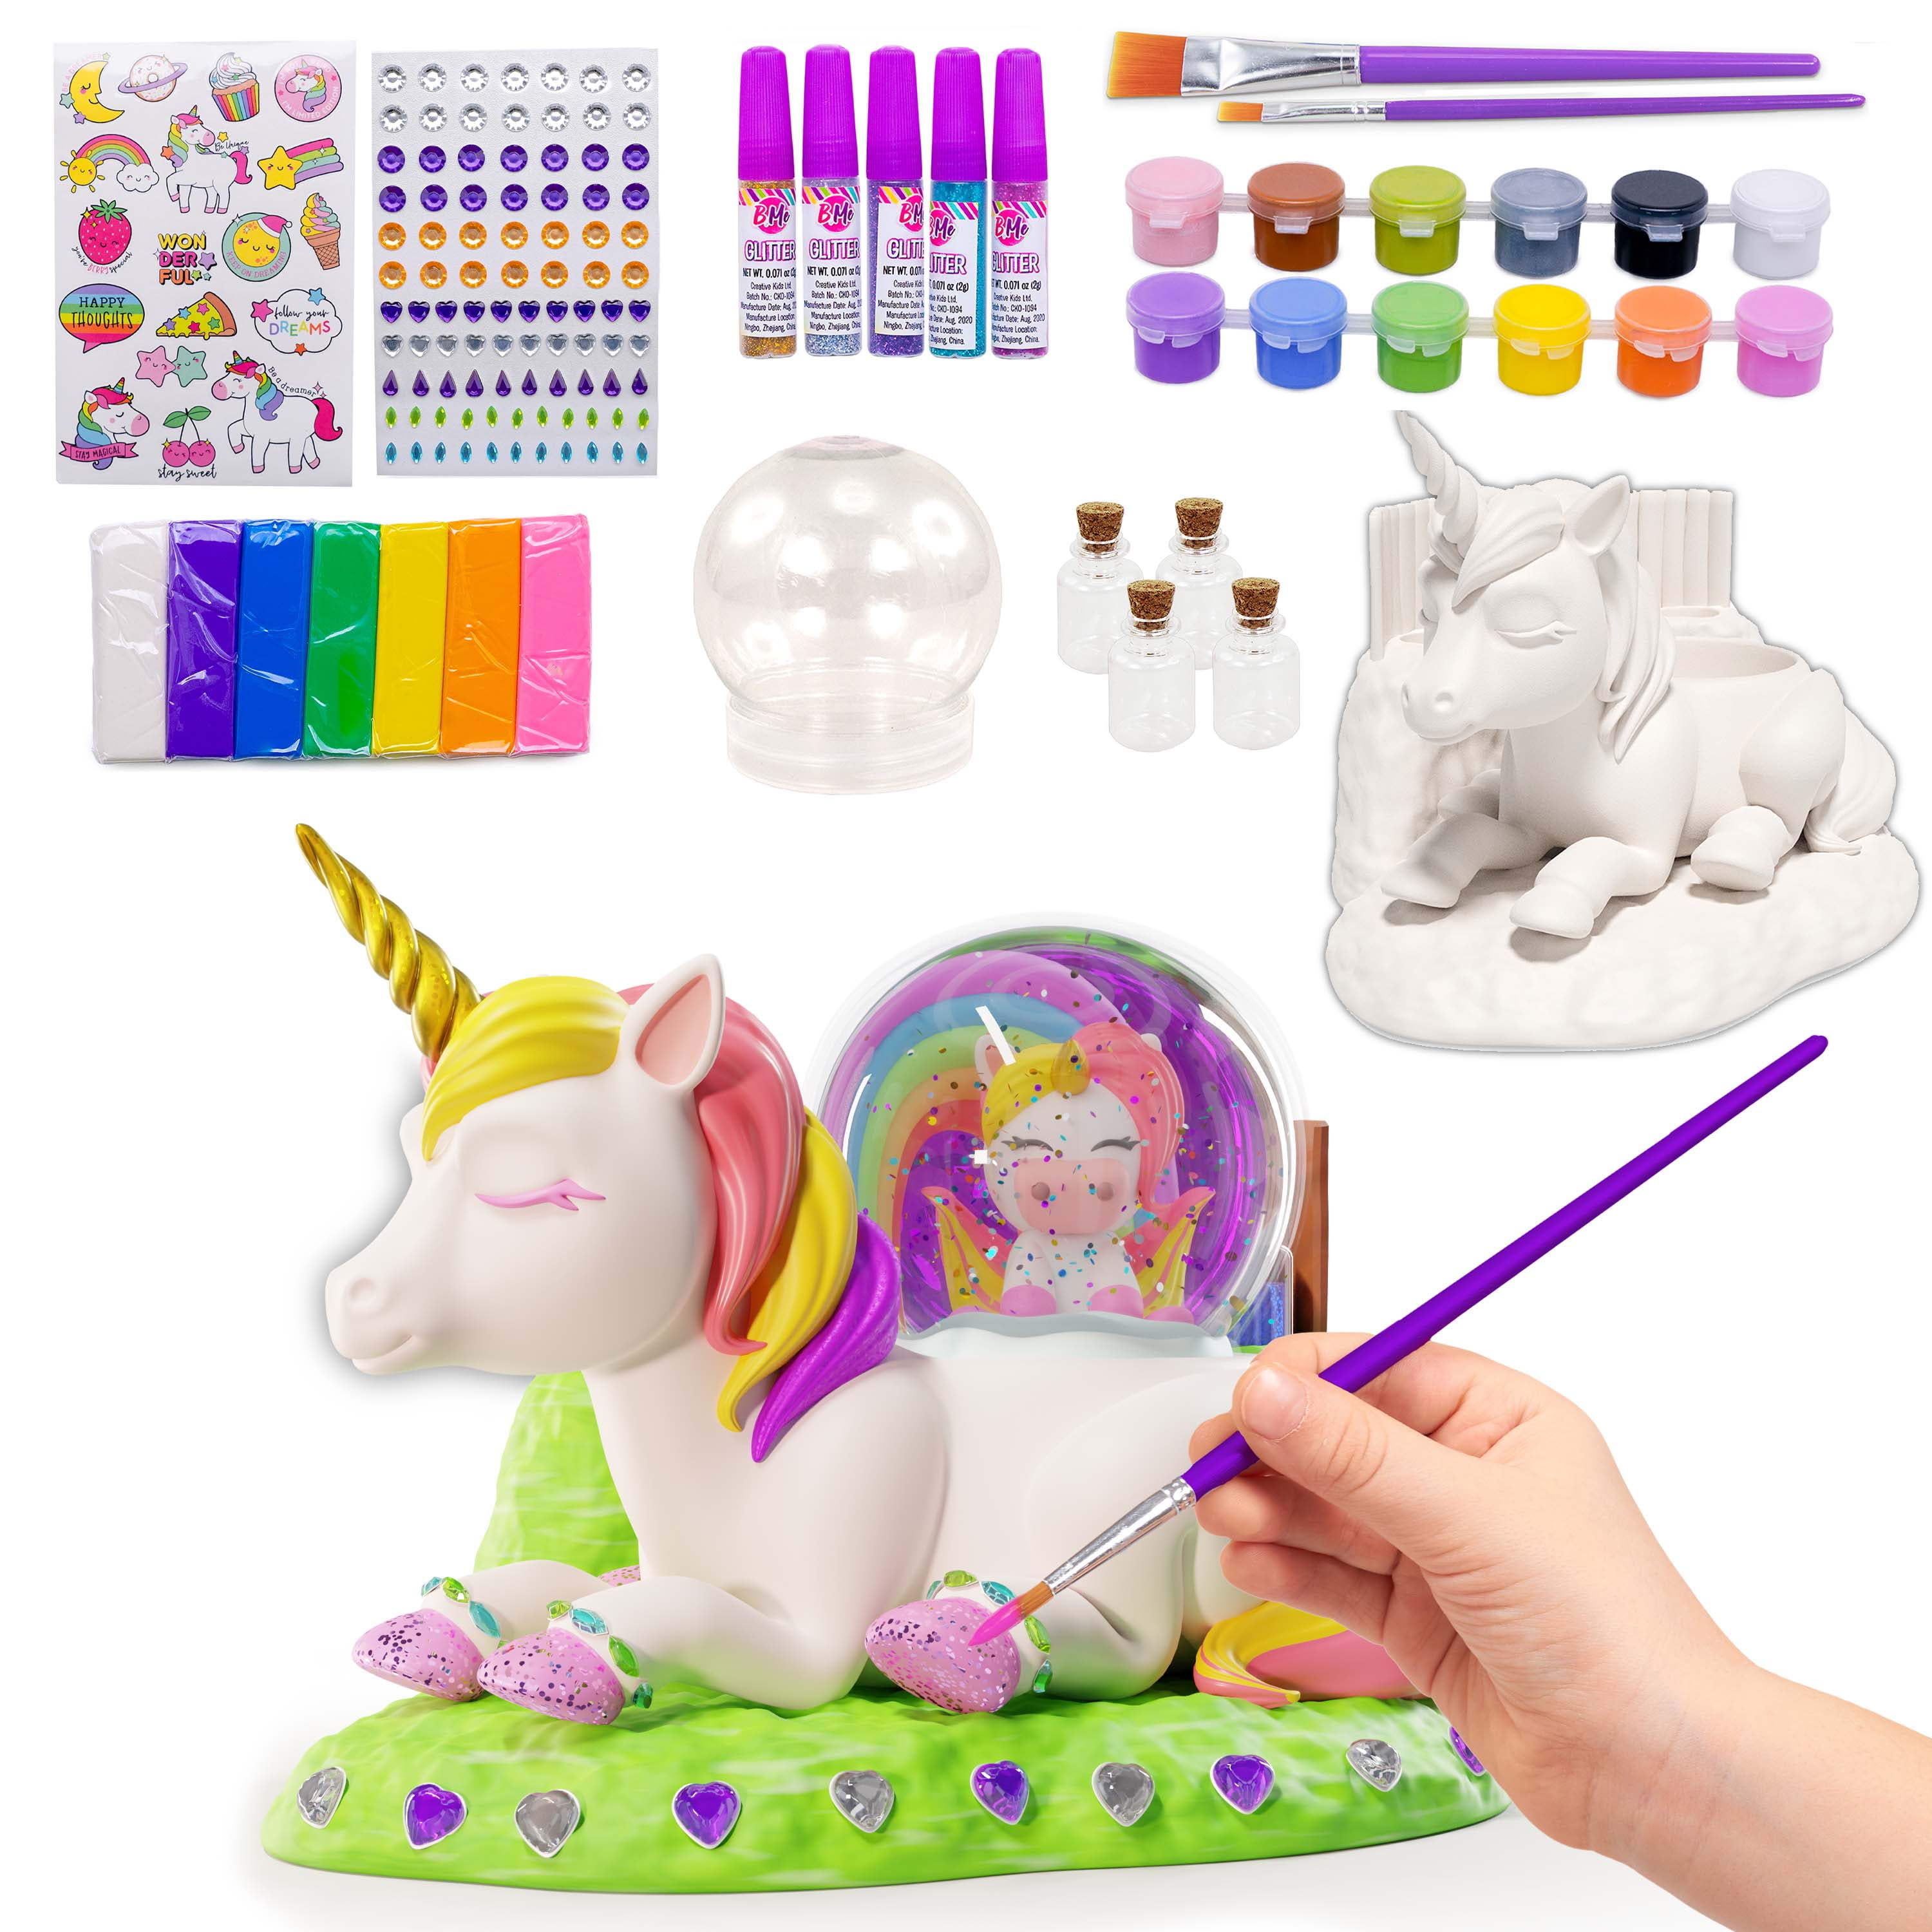 Unicorn Coloring Kit, Kids Piggy Bank, DIY Kids Craft Kits for Girls,  Unicorn Activities for Kids, Gifts for Girls Crafts 